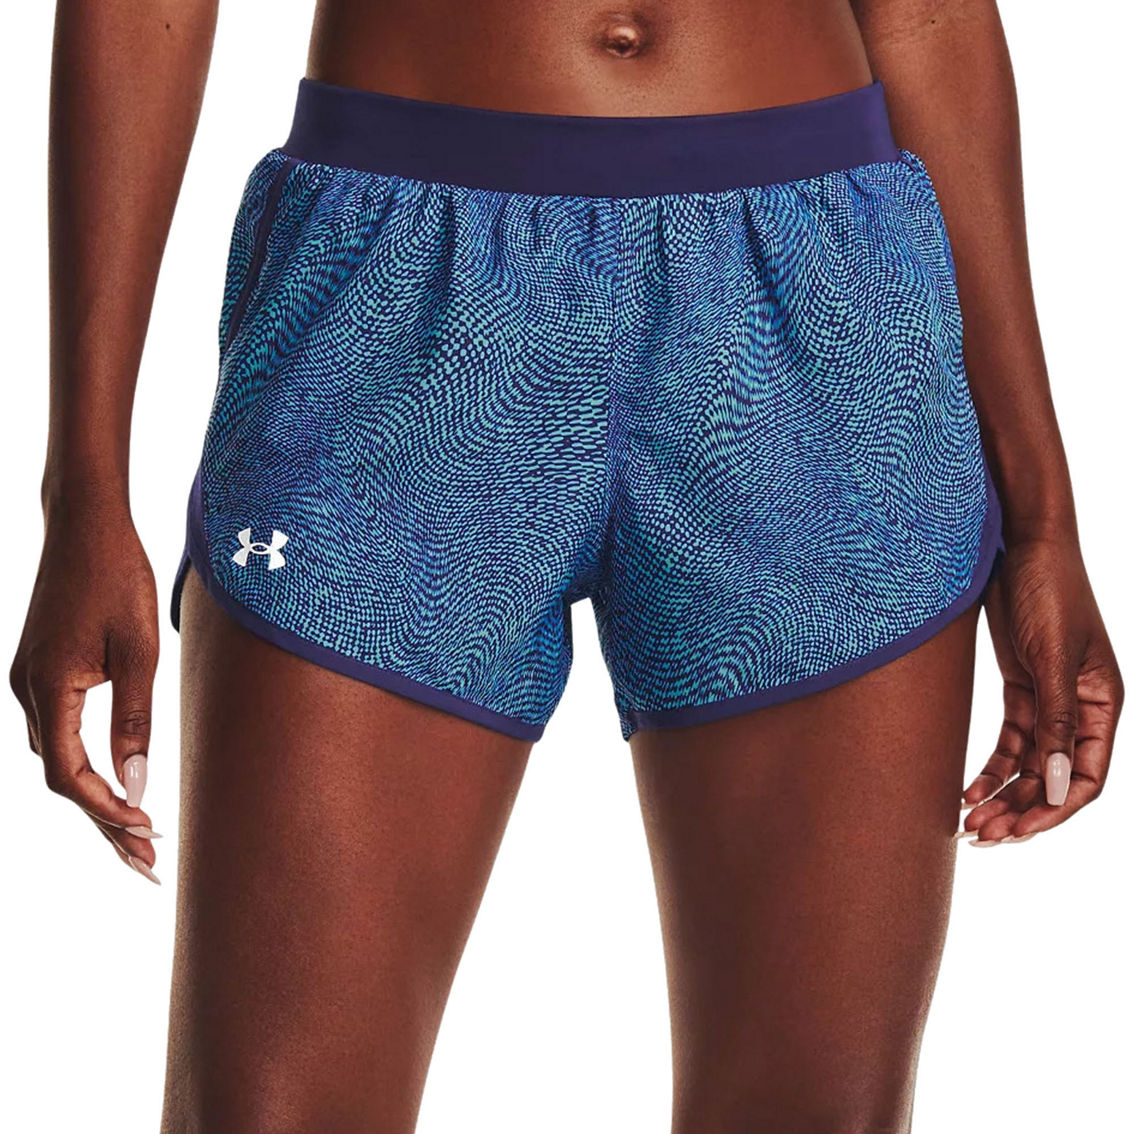 Under Armour Fly By 2.0 Printed Shorts